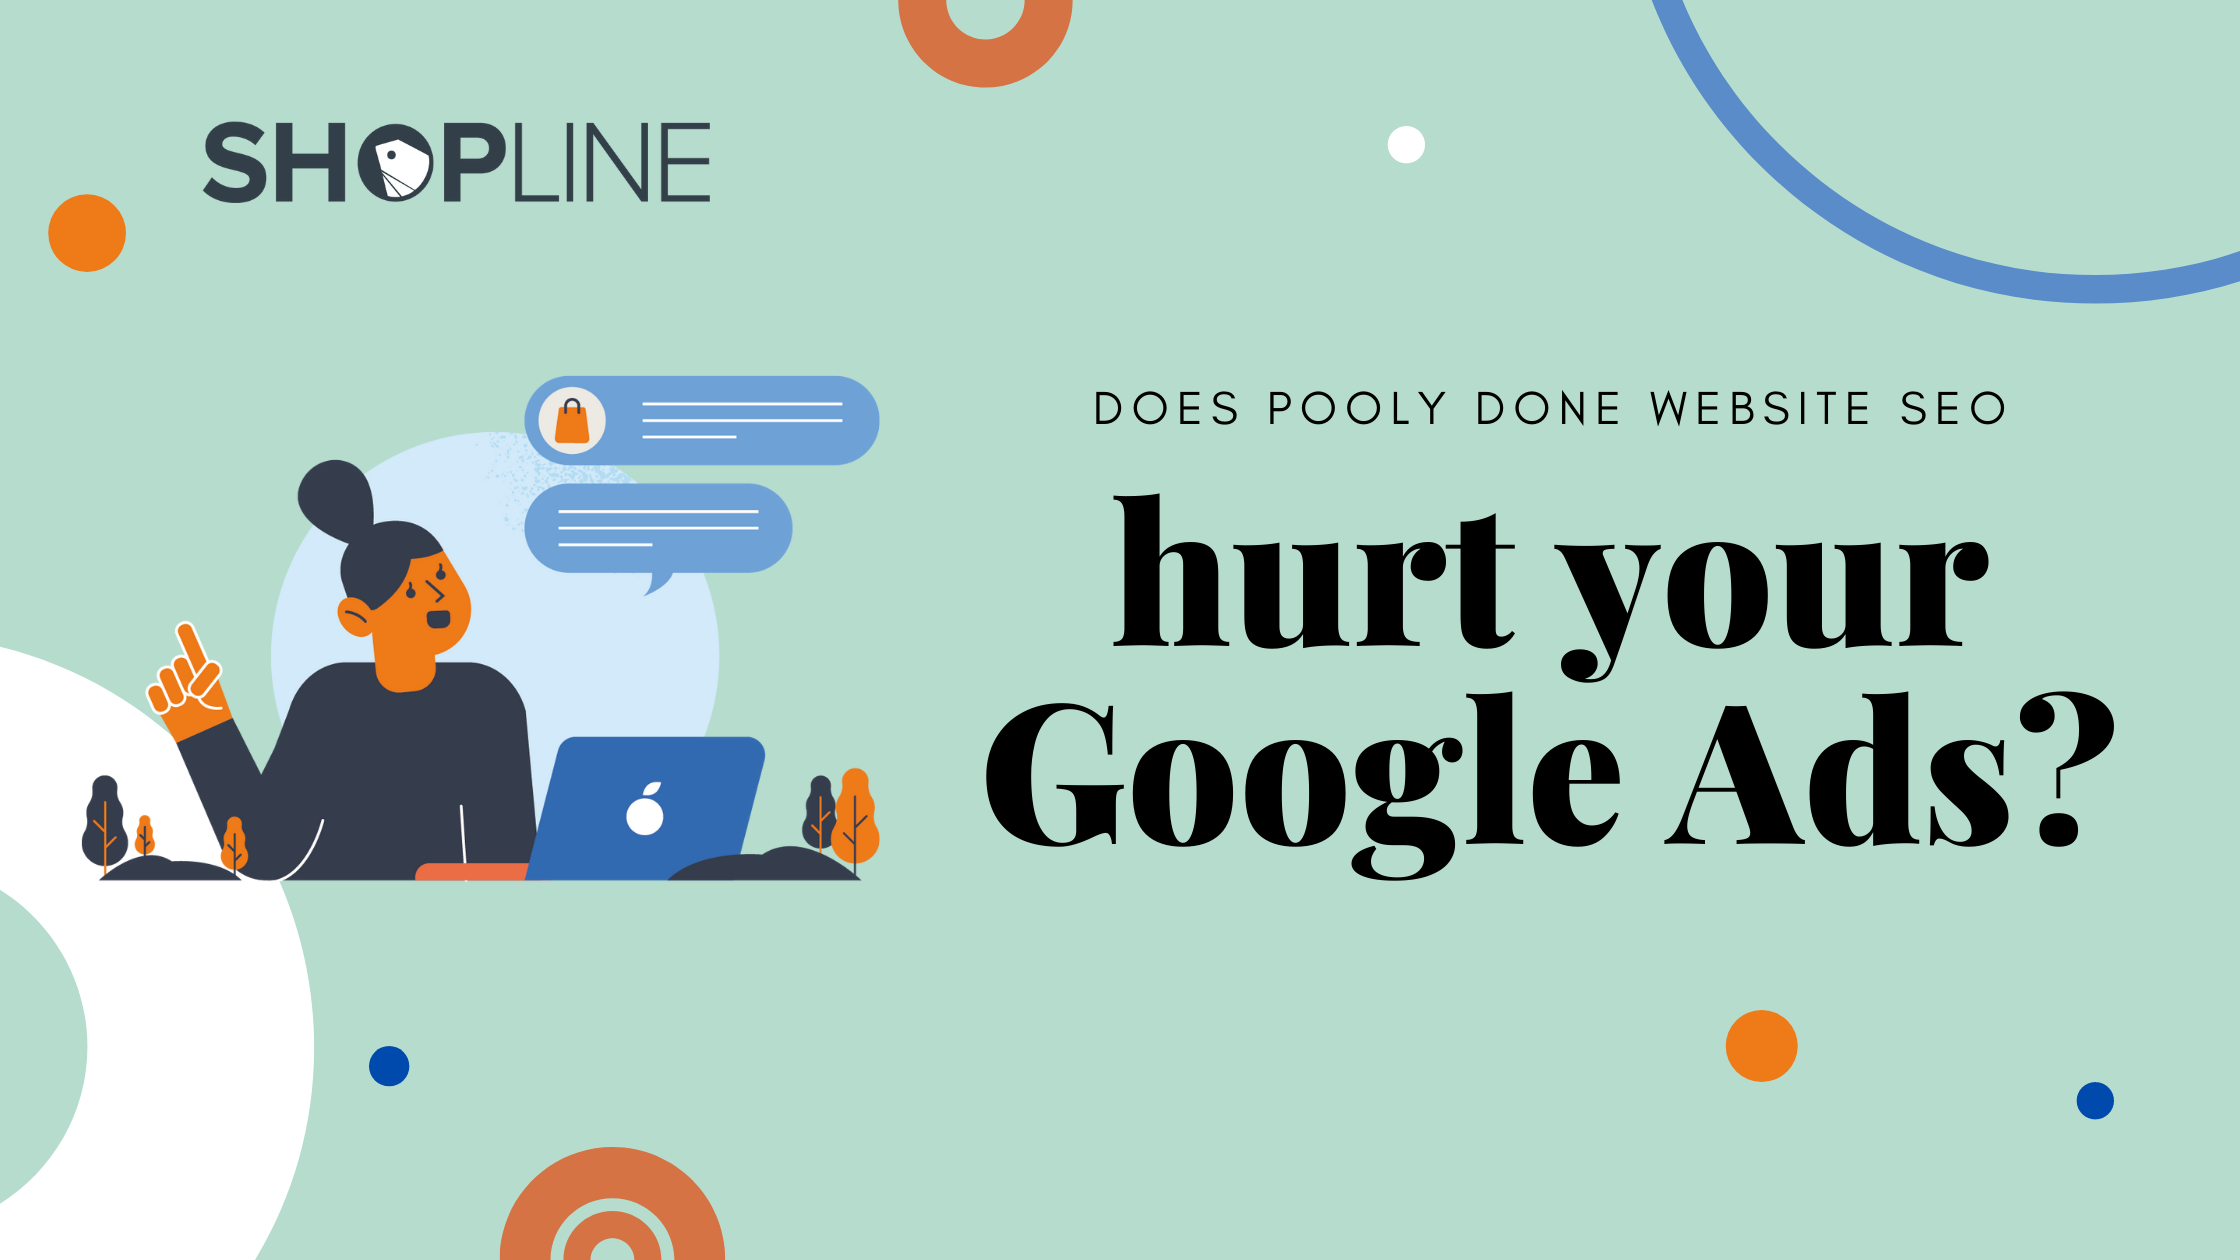 Does Poorly Done Website SEO Hurt Your Google Ads Effectiveness?